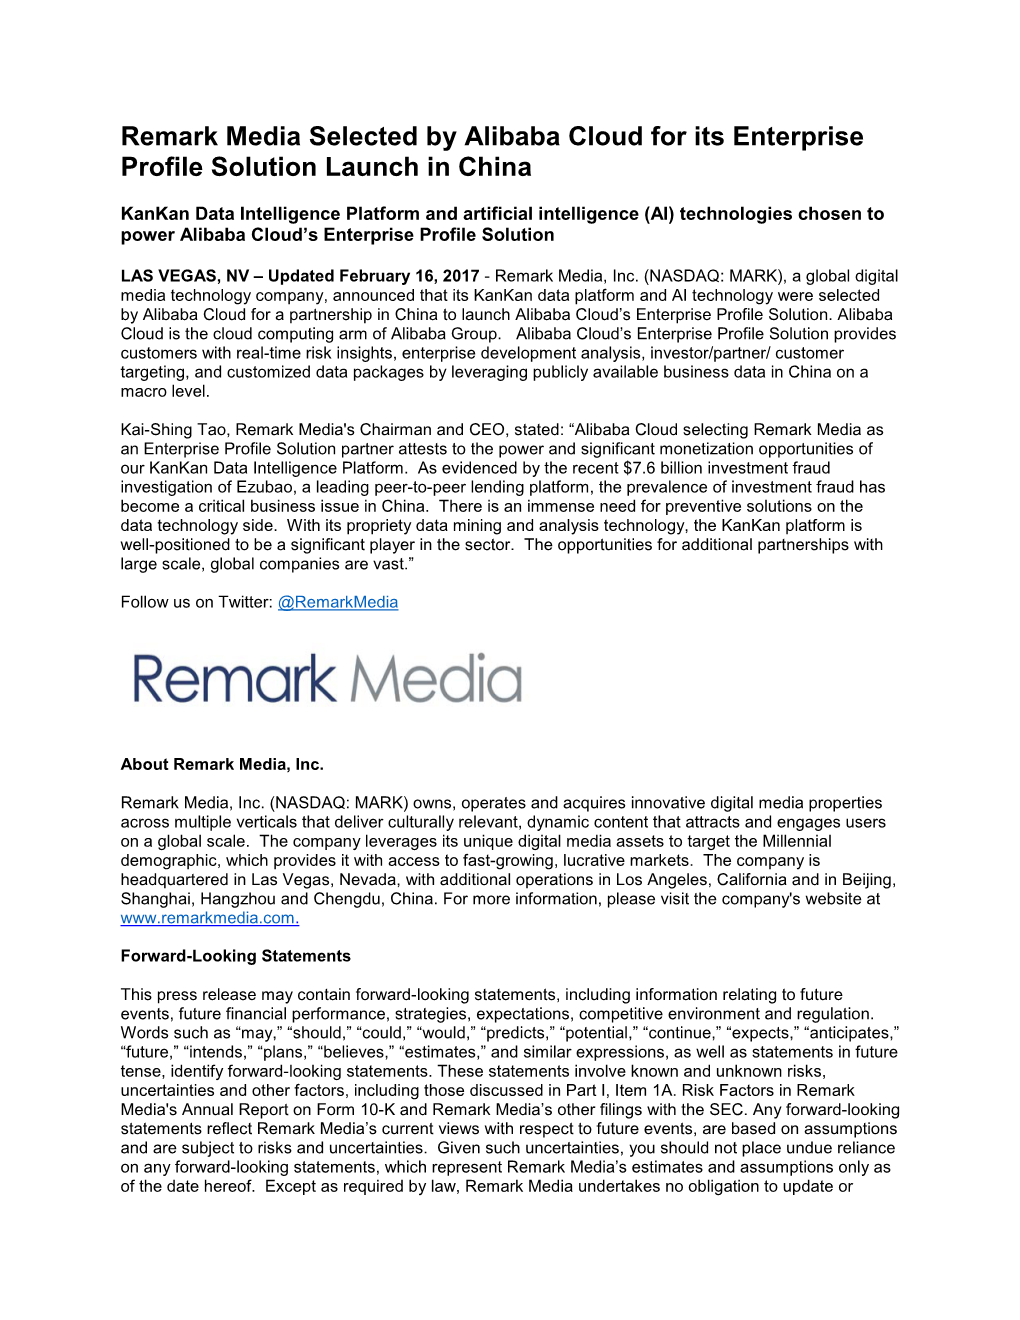 Remark Media Selected by Alibaba Cloud for Its Enterprise Profile Solution Launch in China